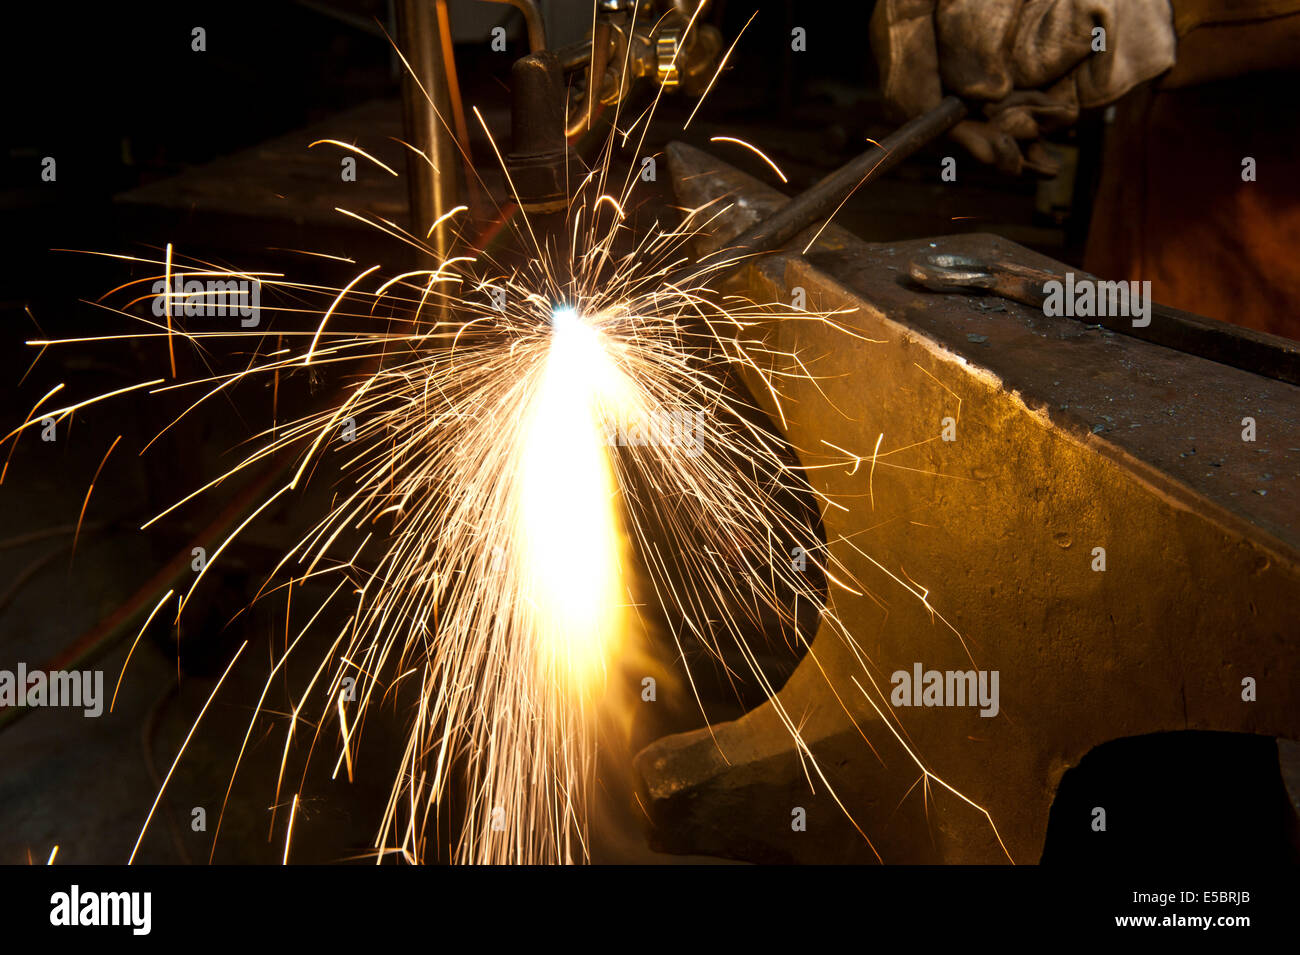 A metal fabricator utilizing a torch to heat up a piece of metal in order to shape it. Stock Photo